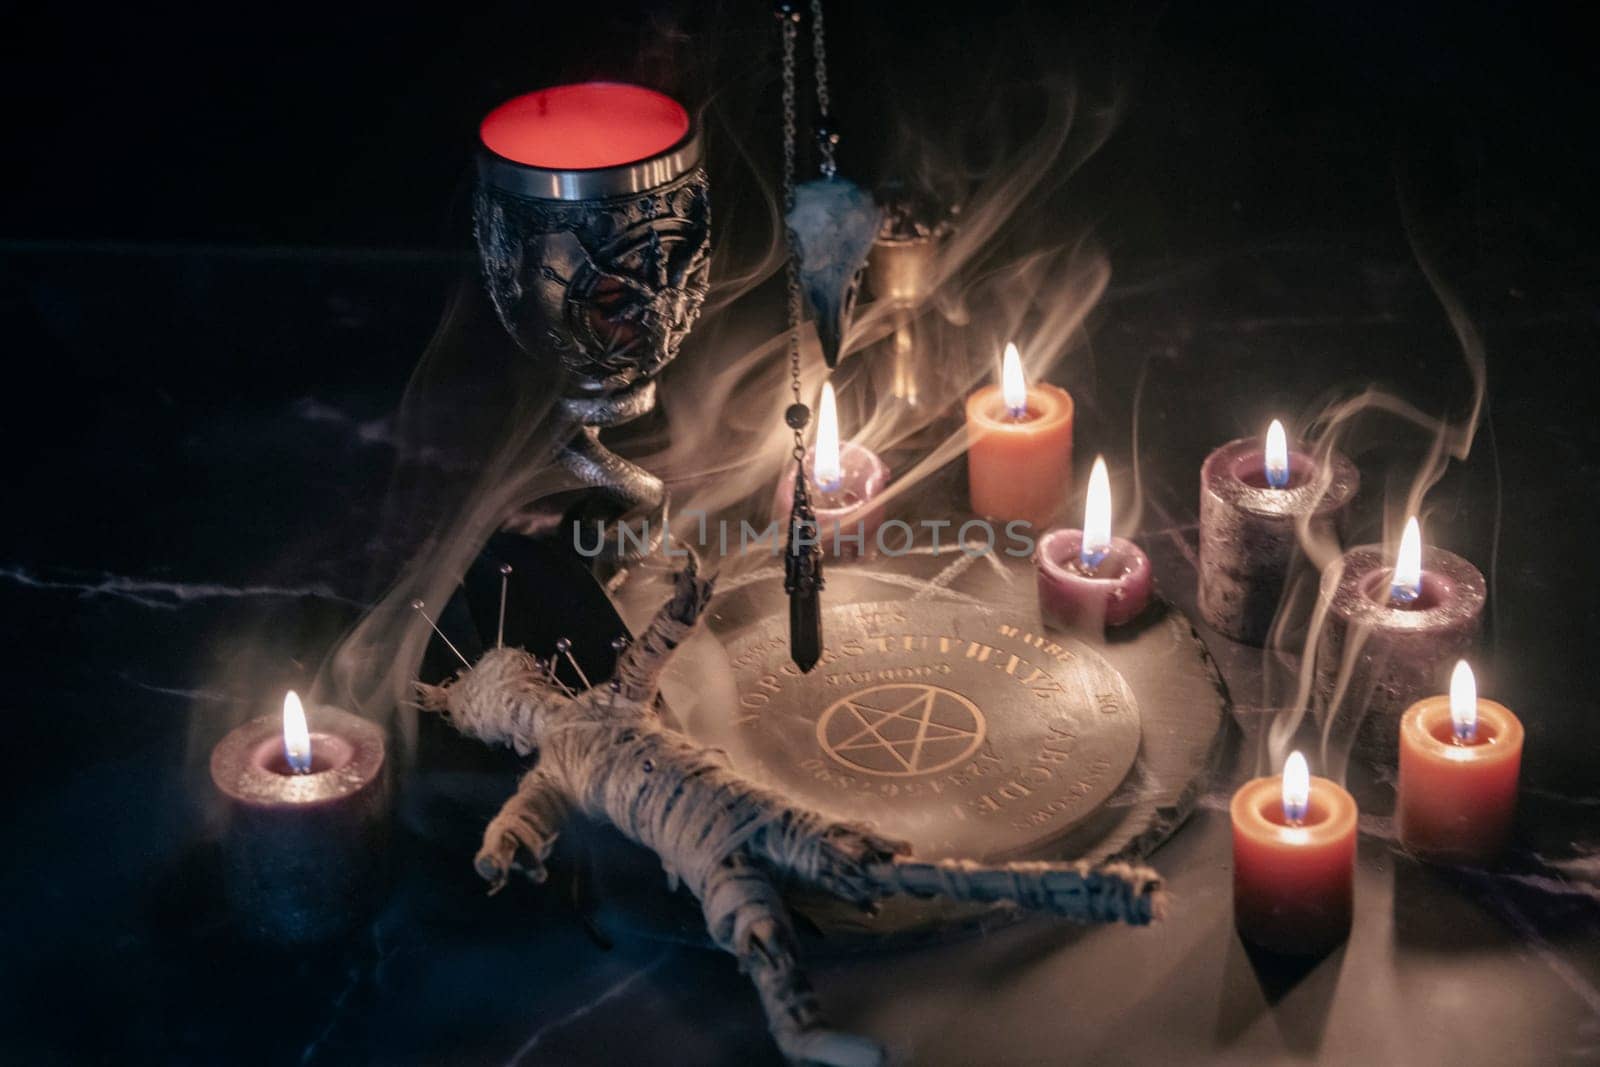 Mysterious Occult Ceremony with Pendulum and Mystic Symbols. by jbruiz78